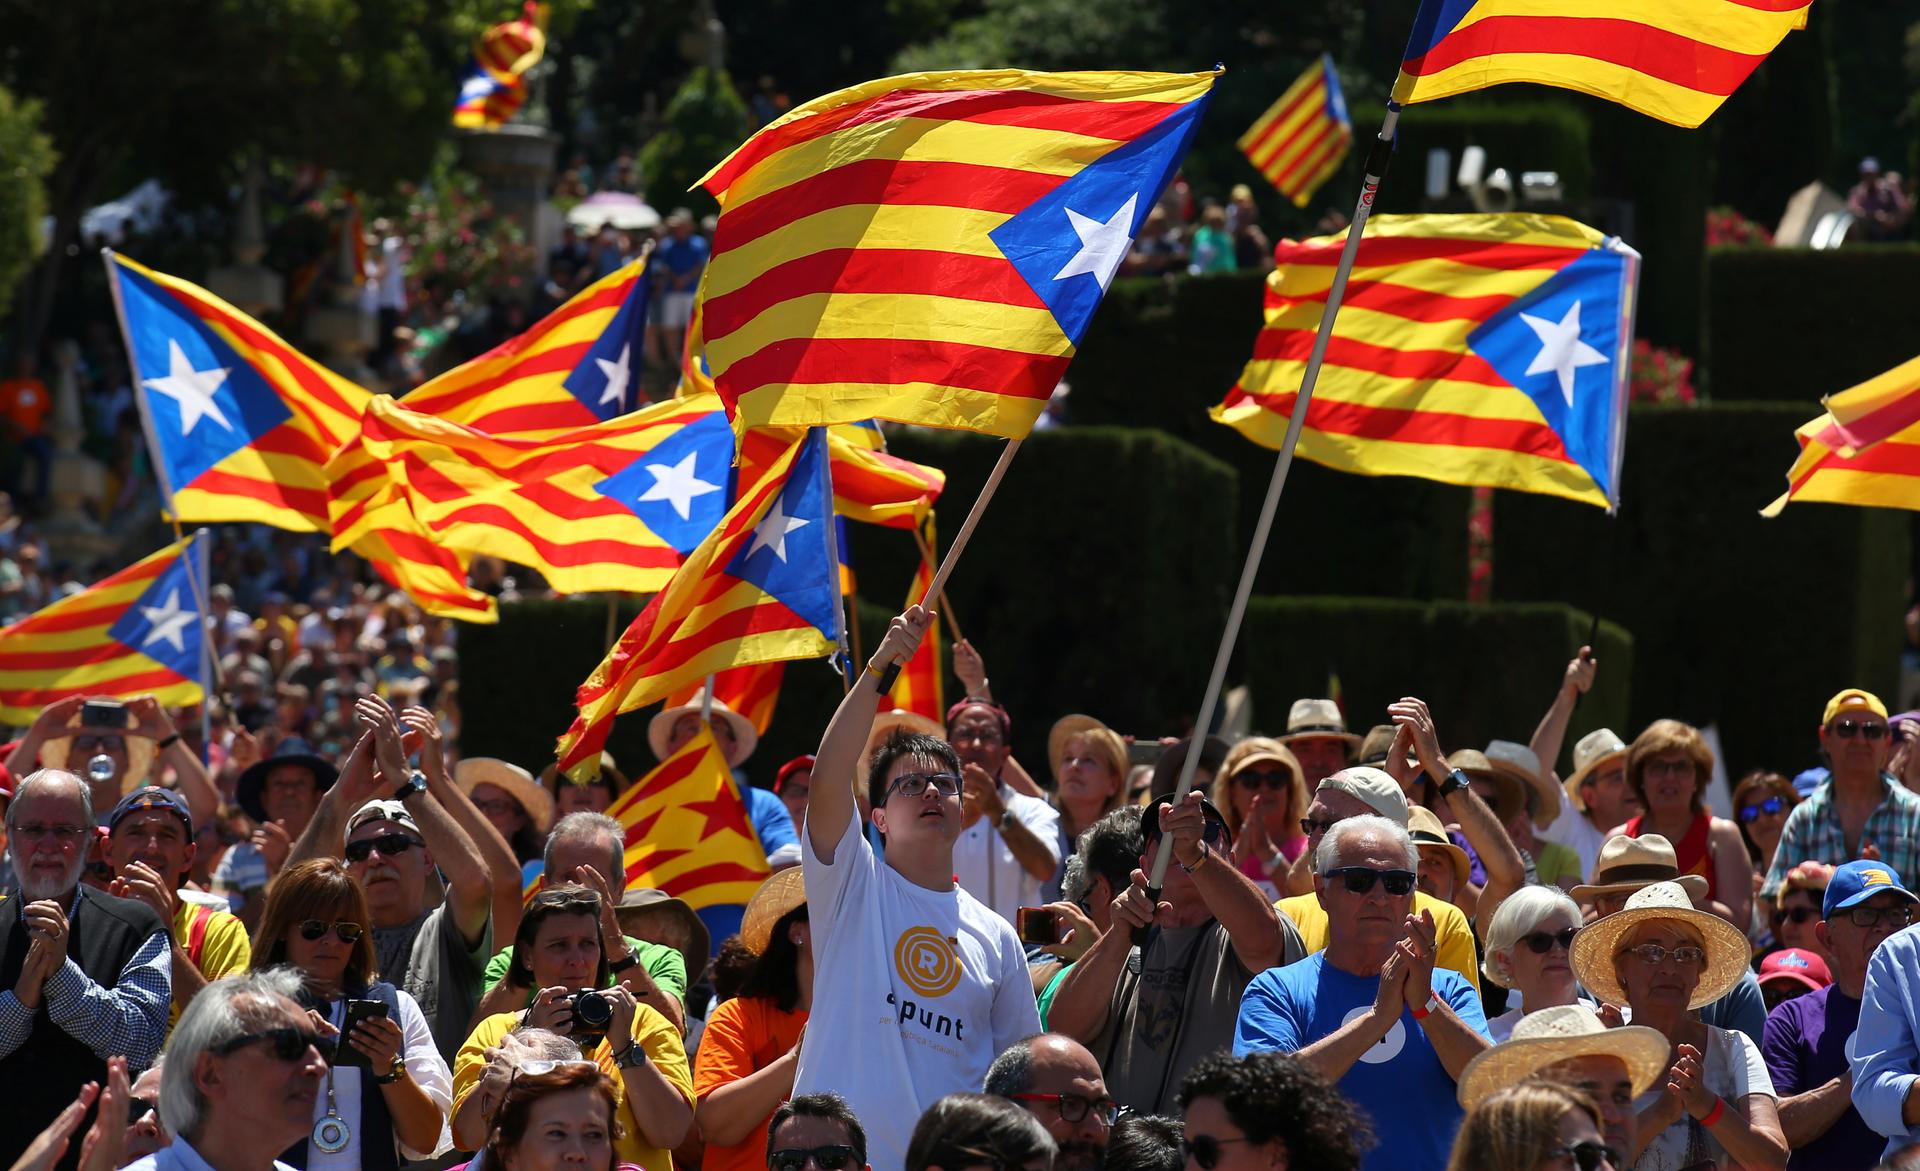 People fly "Estelada" flags (the Catalan separatist flag) during a pro-independence rally in Barcelona, Spain June 11, 2017.